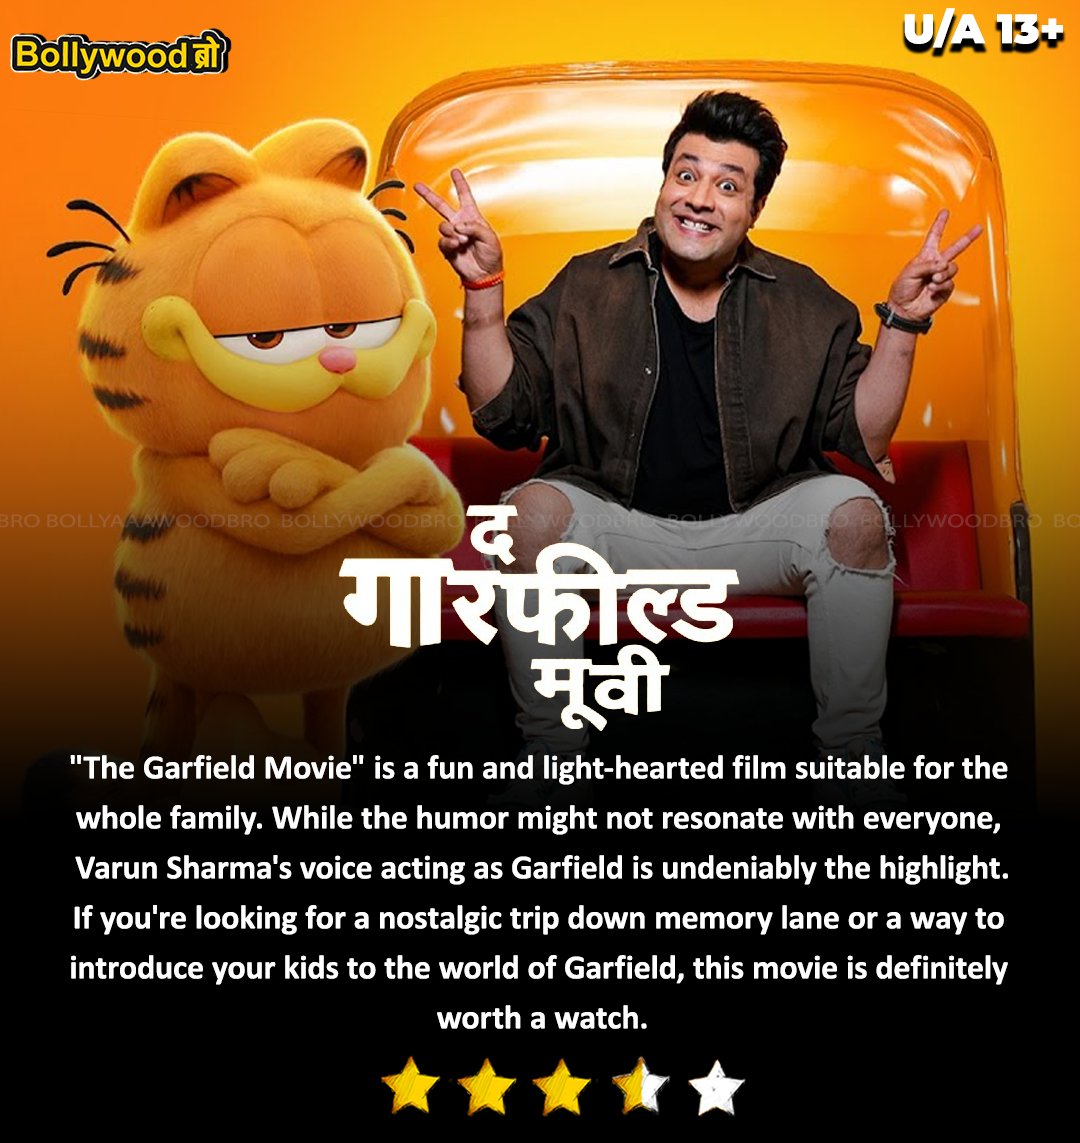 One of the biggest highlights of the film is the voice acting. #VarunSharma perfectly captures Garfield's deadpan humor, sarcastic wit, and occasional vulnerability. His delivery is spot-on, making you believe Garfield himself is cracking wise on screen. Varun manages to infuse